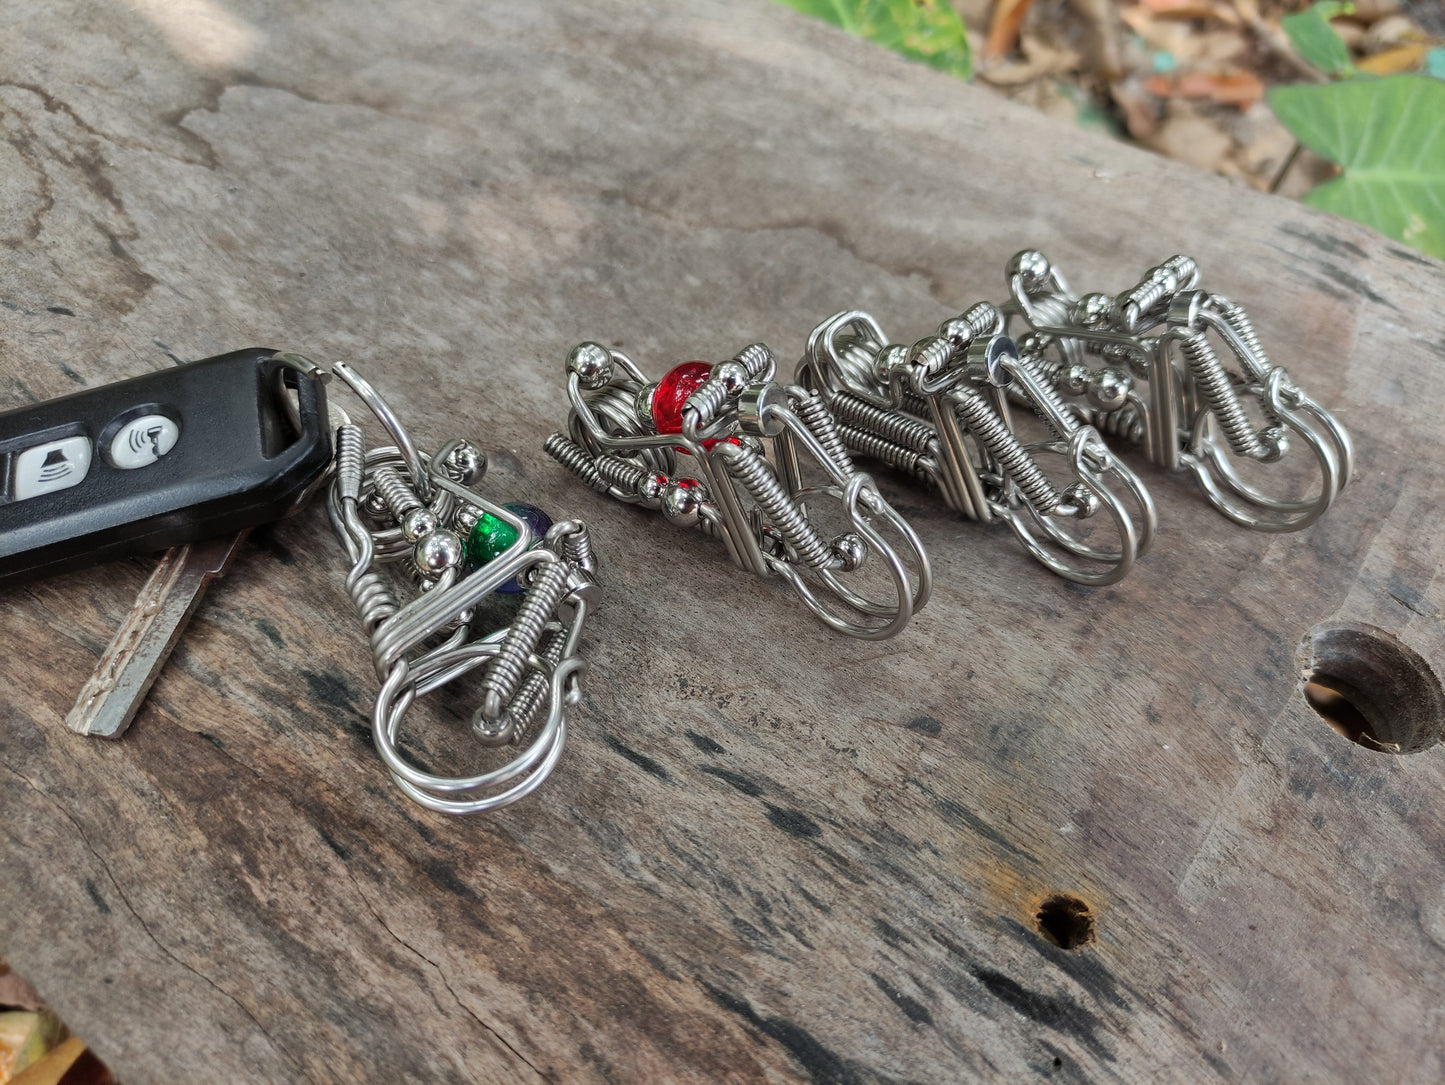 Keychain with Motorcycle design -  green fuel tank